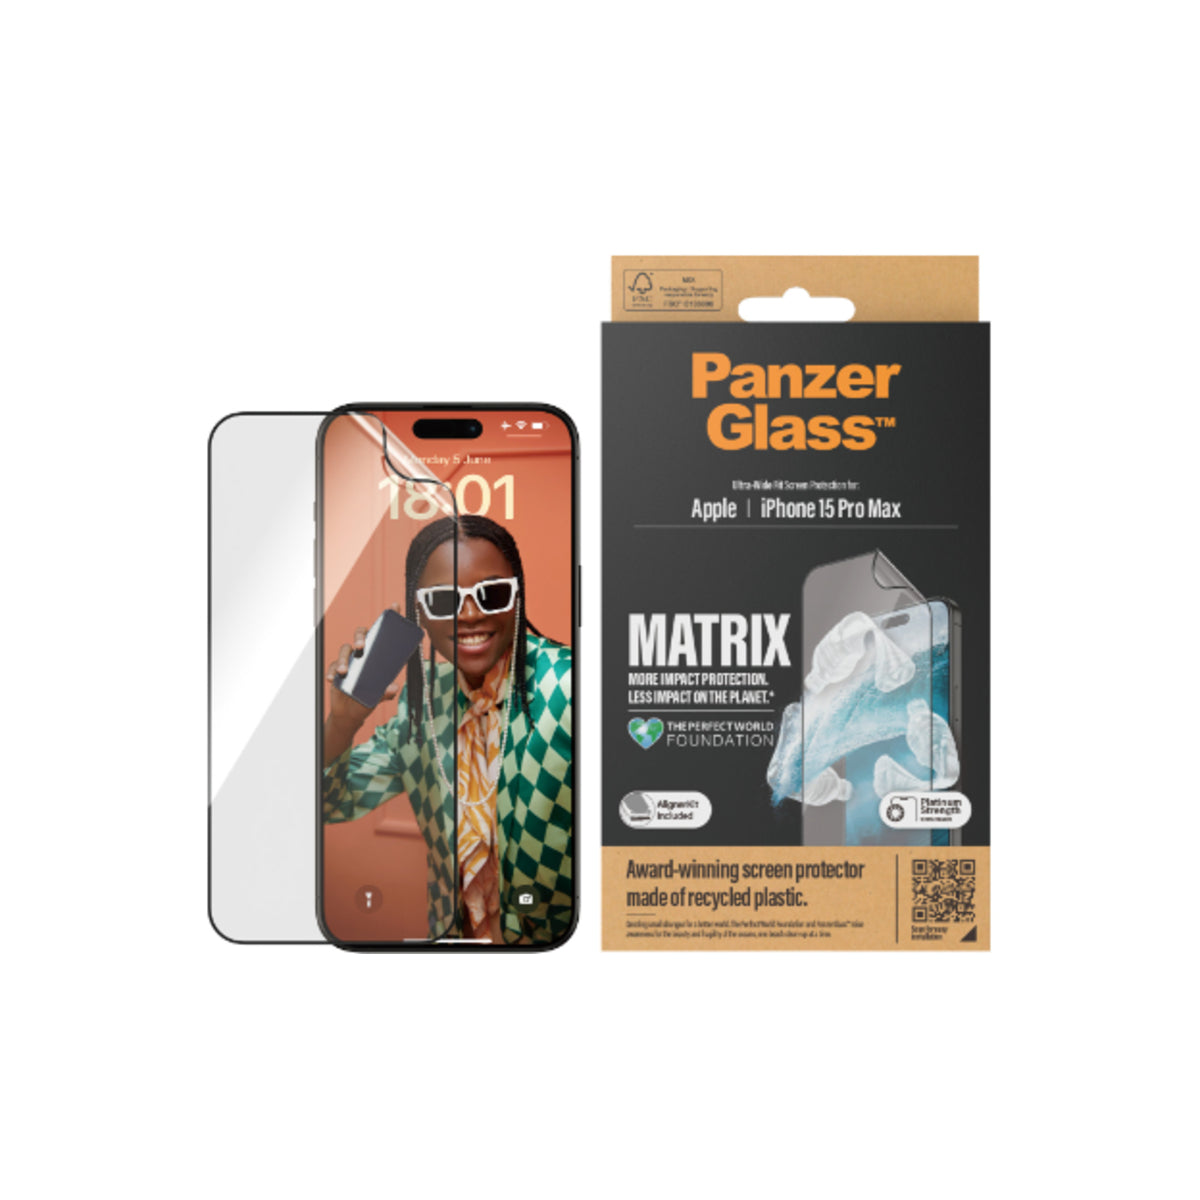 PanzerGlass Matrix Ultra Wide Screen Protector and AlignerKit for iPhone 15 Pro Max